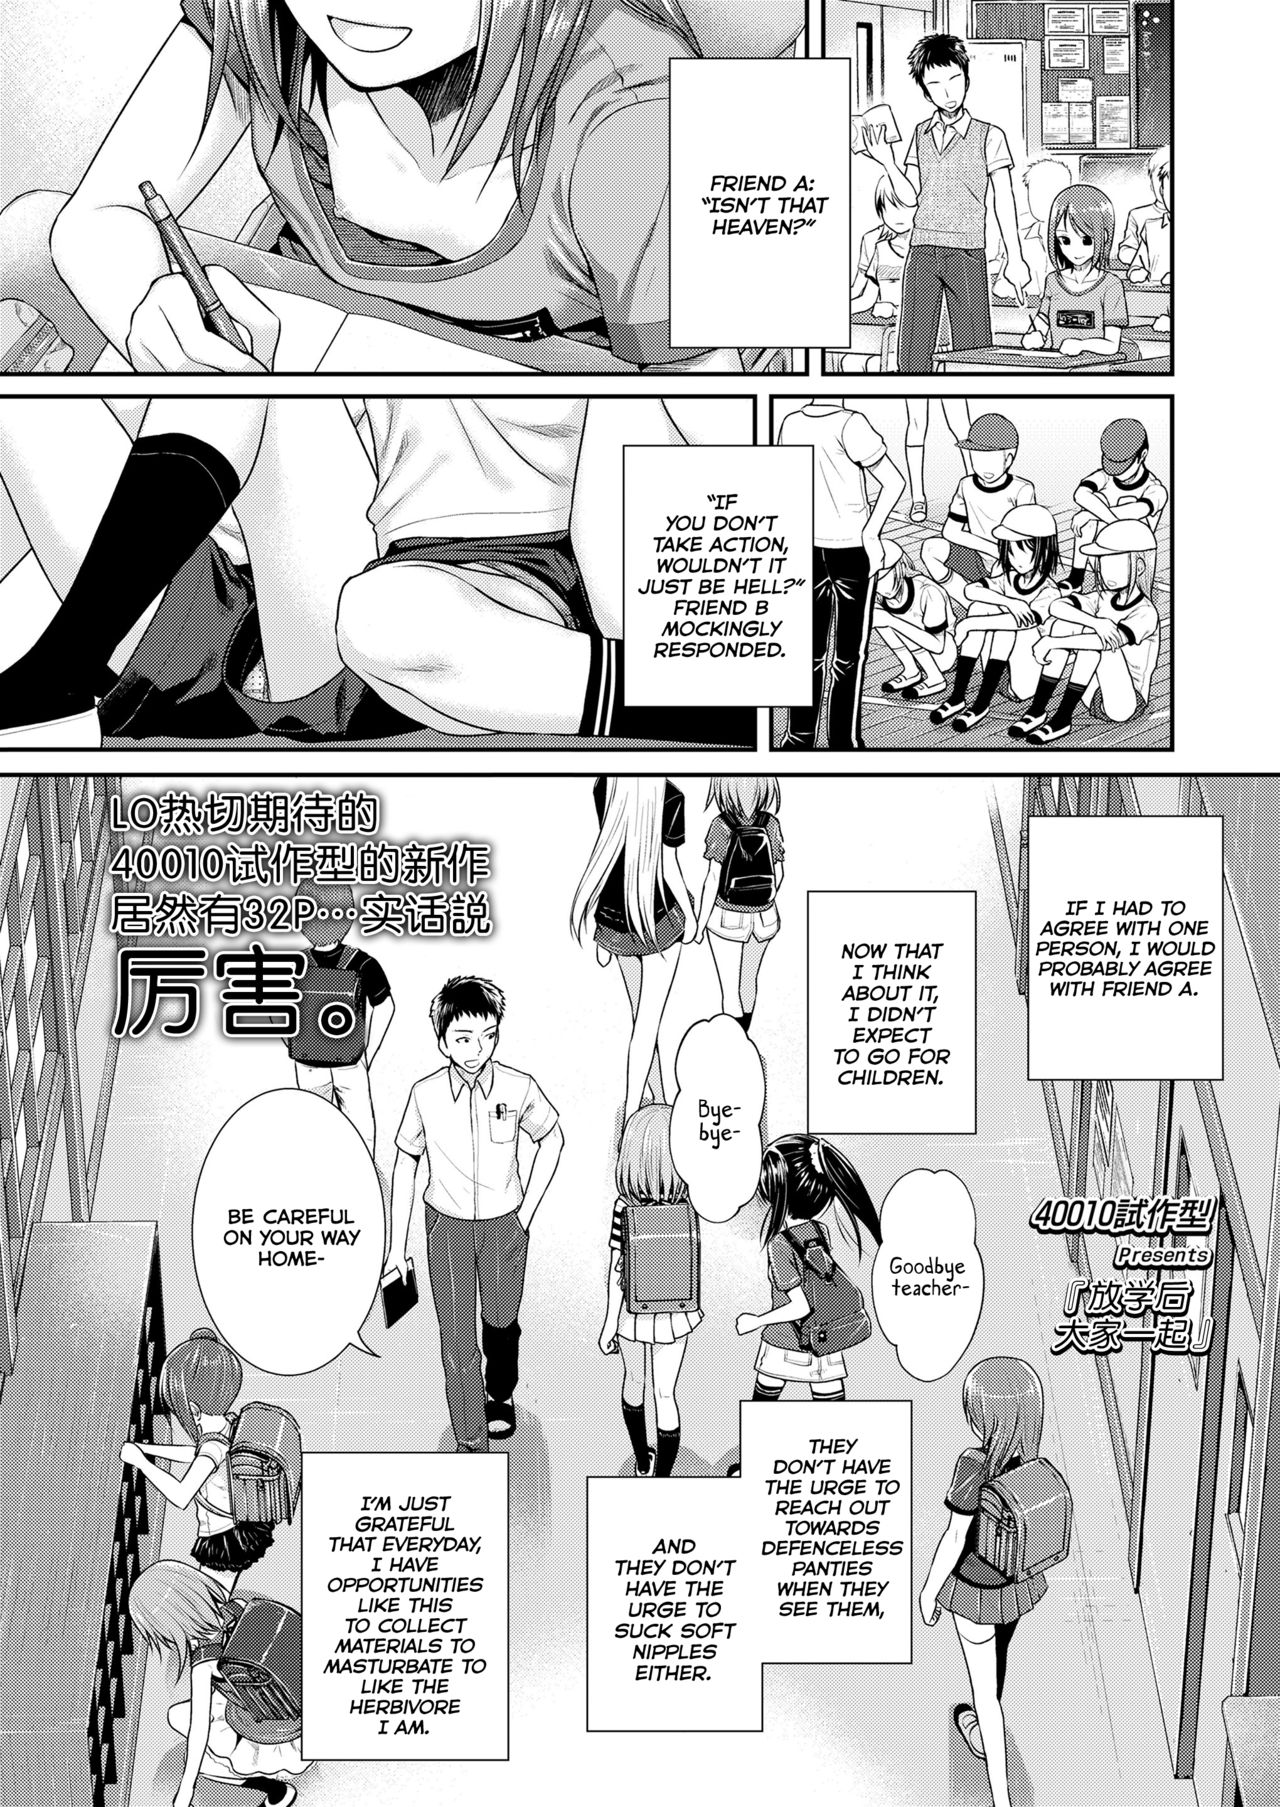 Prototype Lolita Vol.1 Chapter 1: Together With Everyone After School - Picture 1